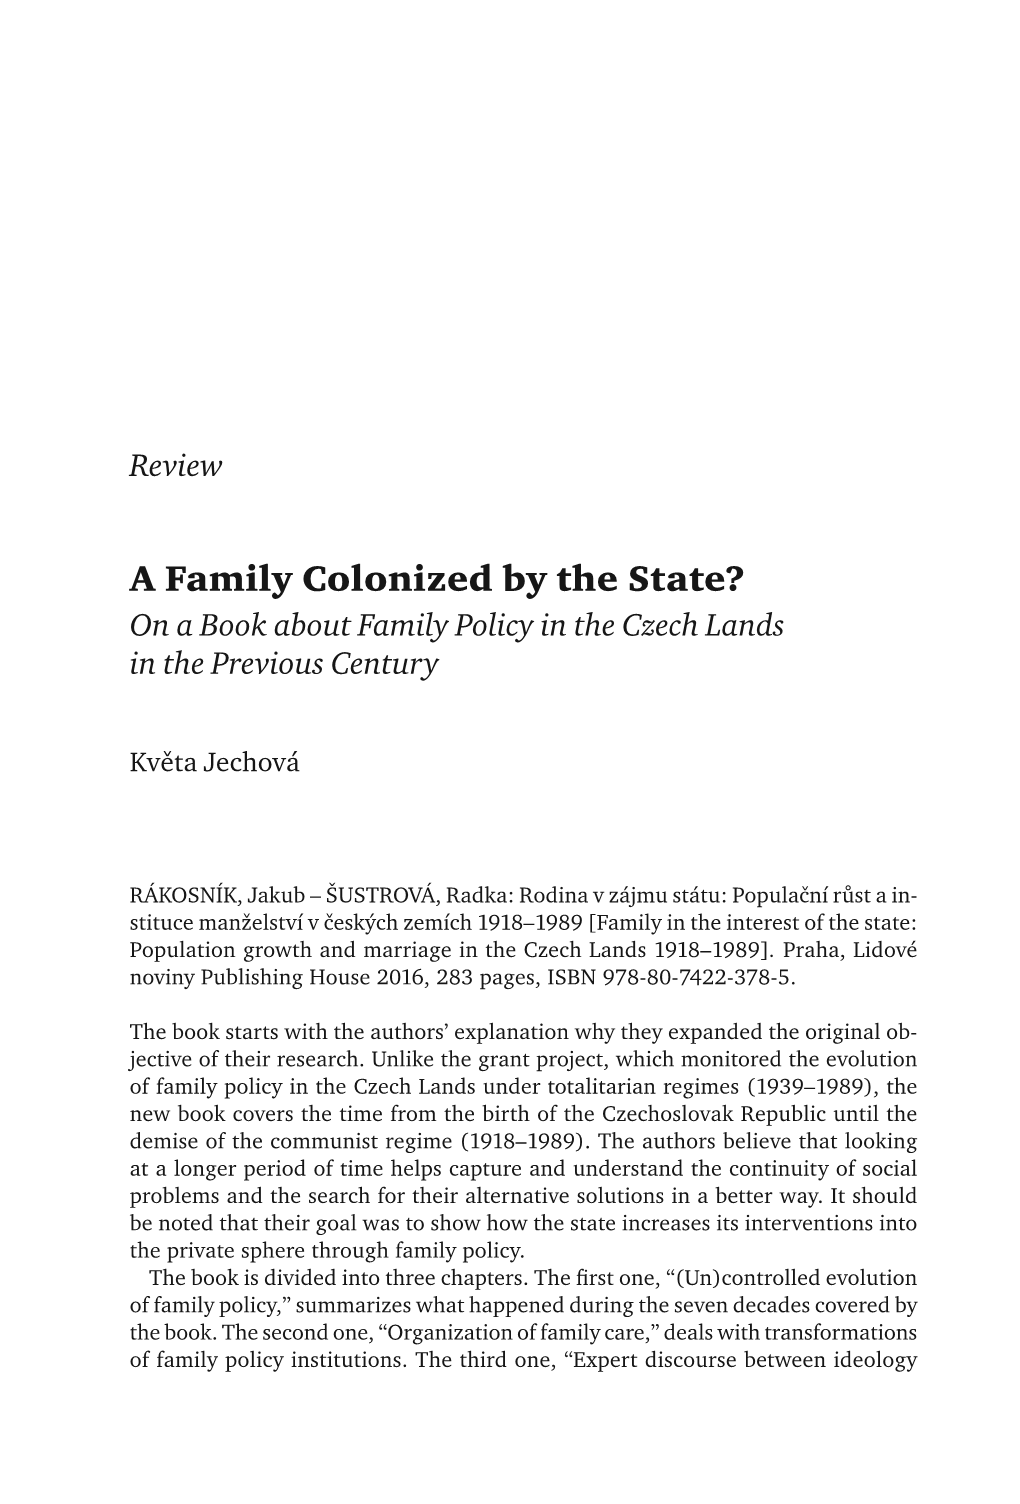 A Family Colonized by the State? on a Book About Family Policy in the Czech Lands in the Previous Century